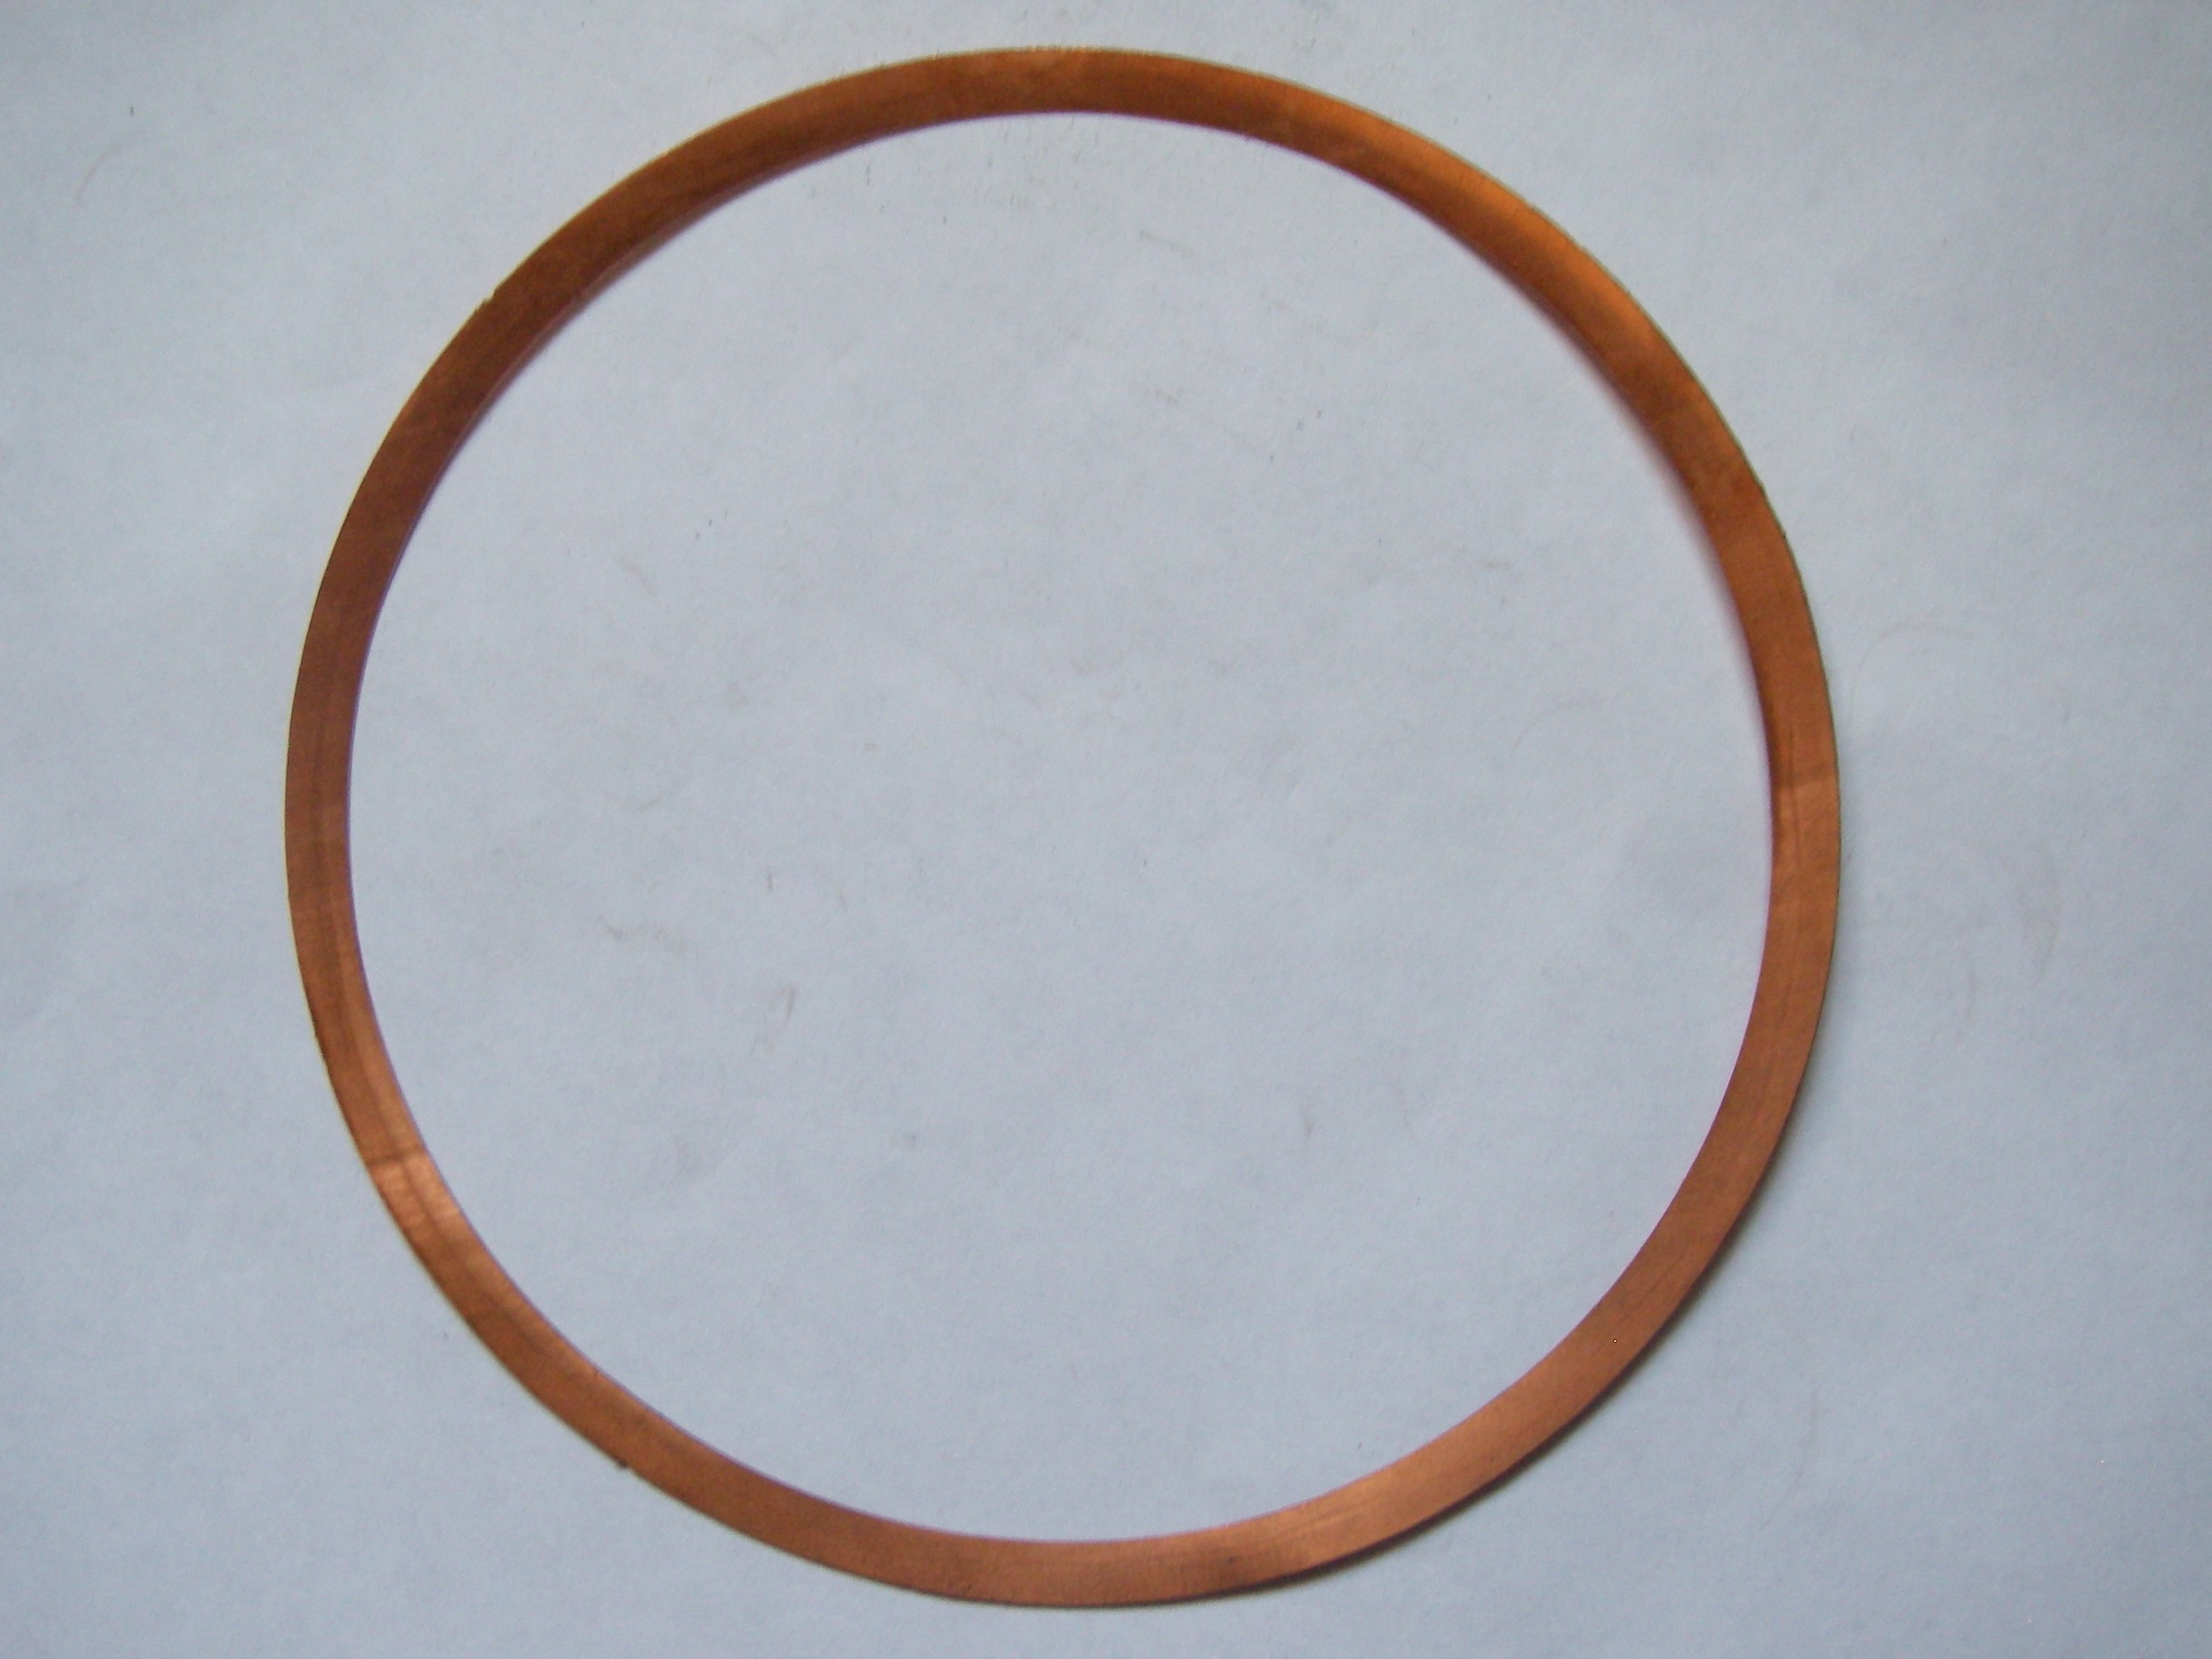 <b>Compatible with the Lister TR1 & TS1 Eng. - Copper Cylinder Barrel Joint Gasket</b>